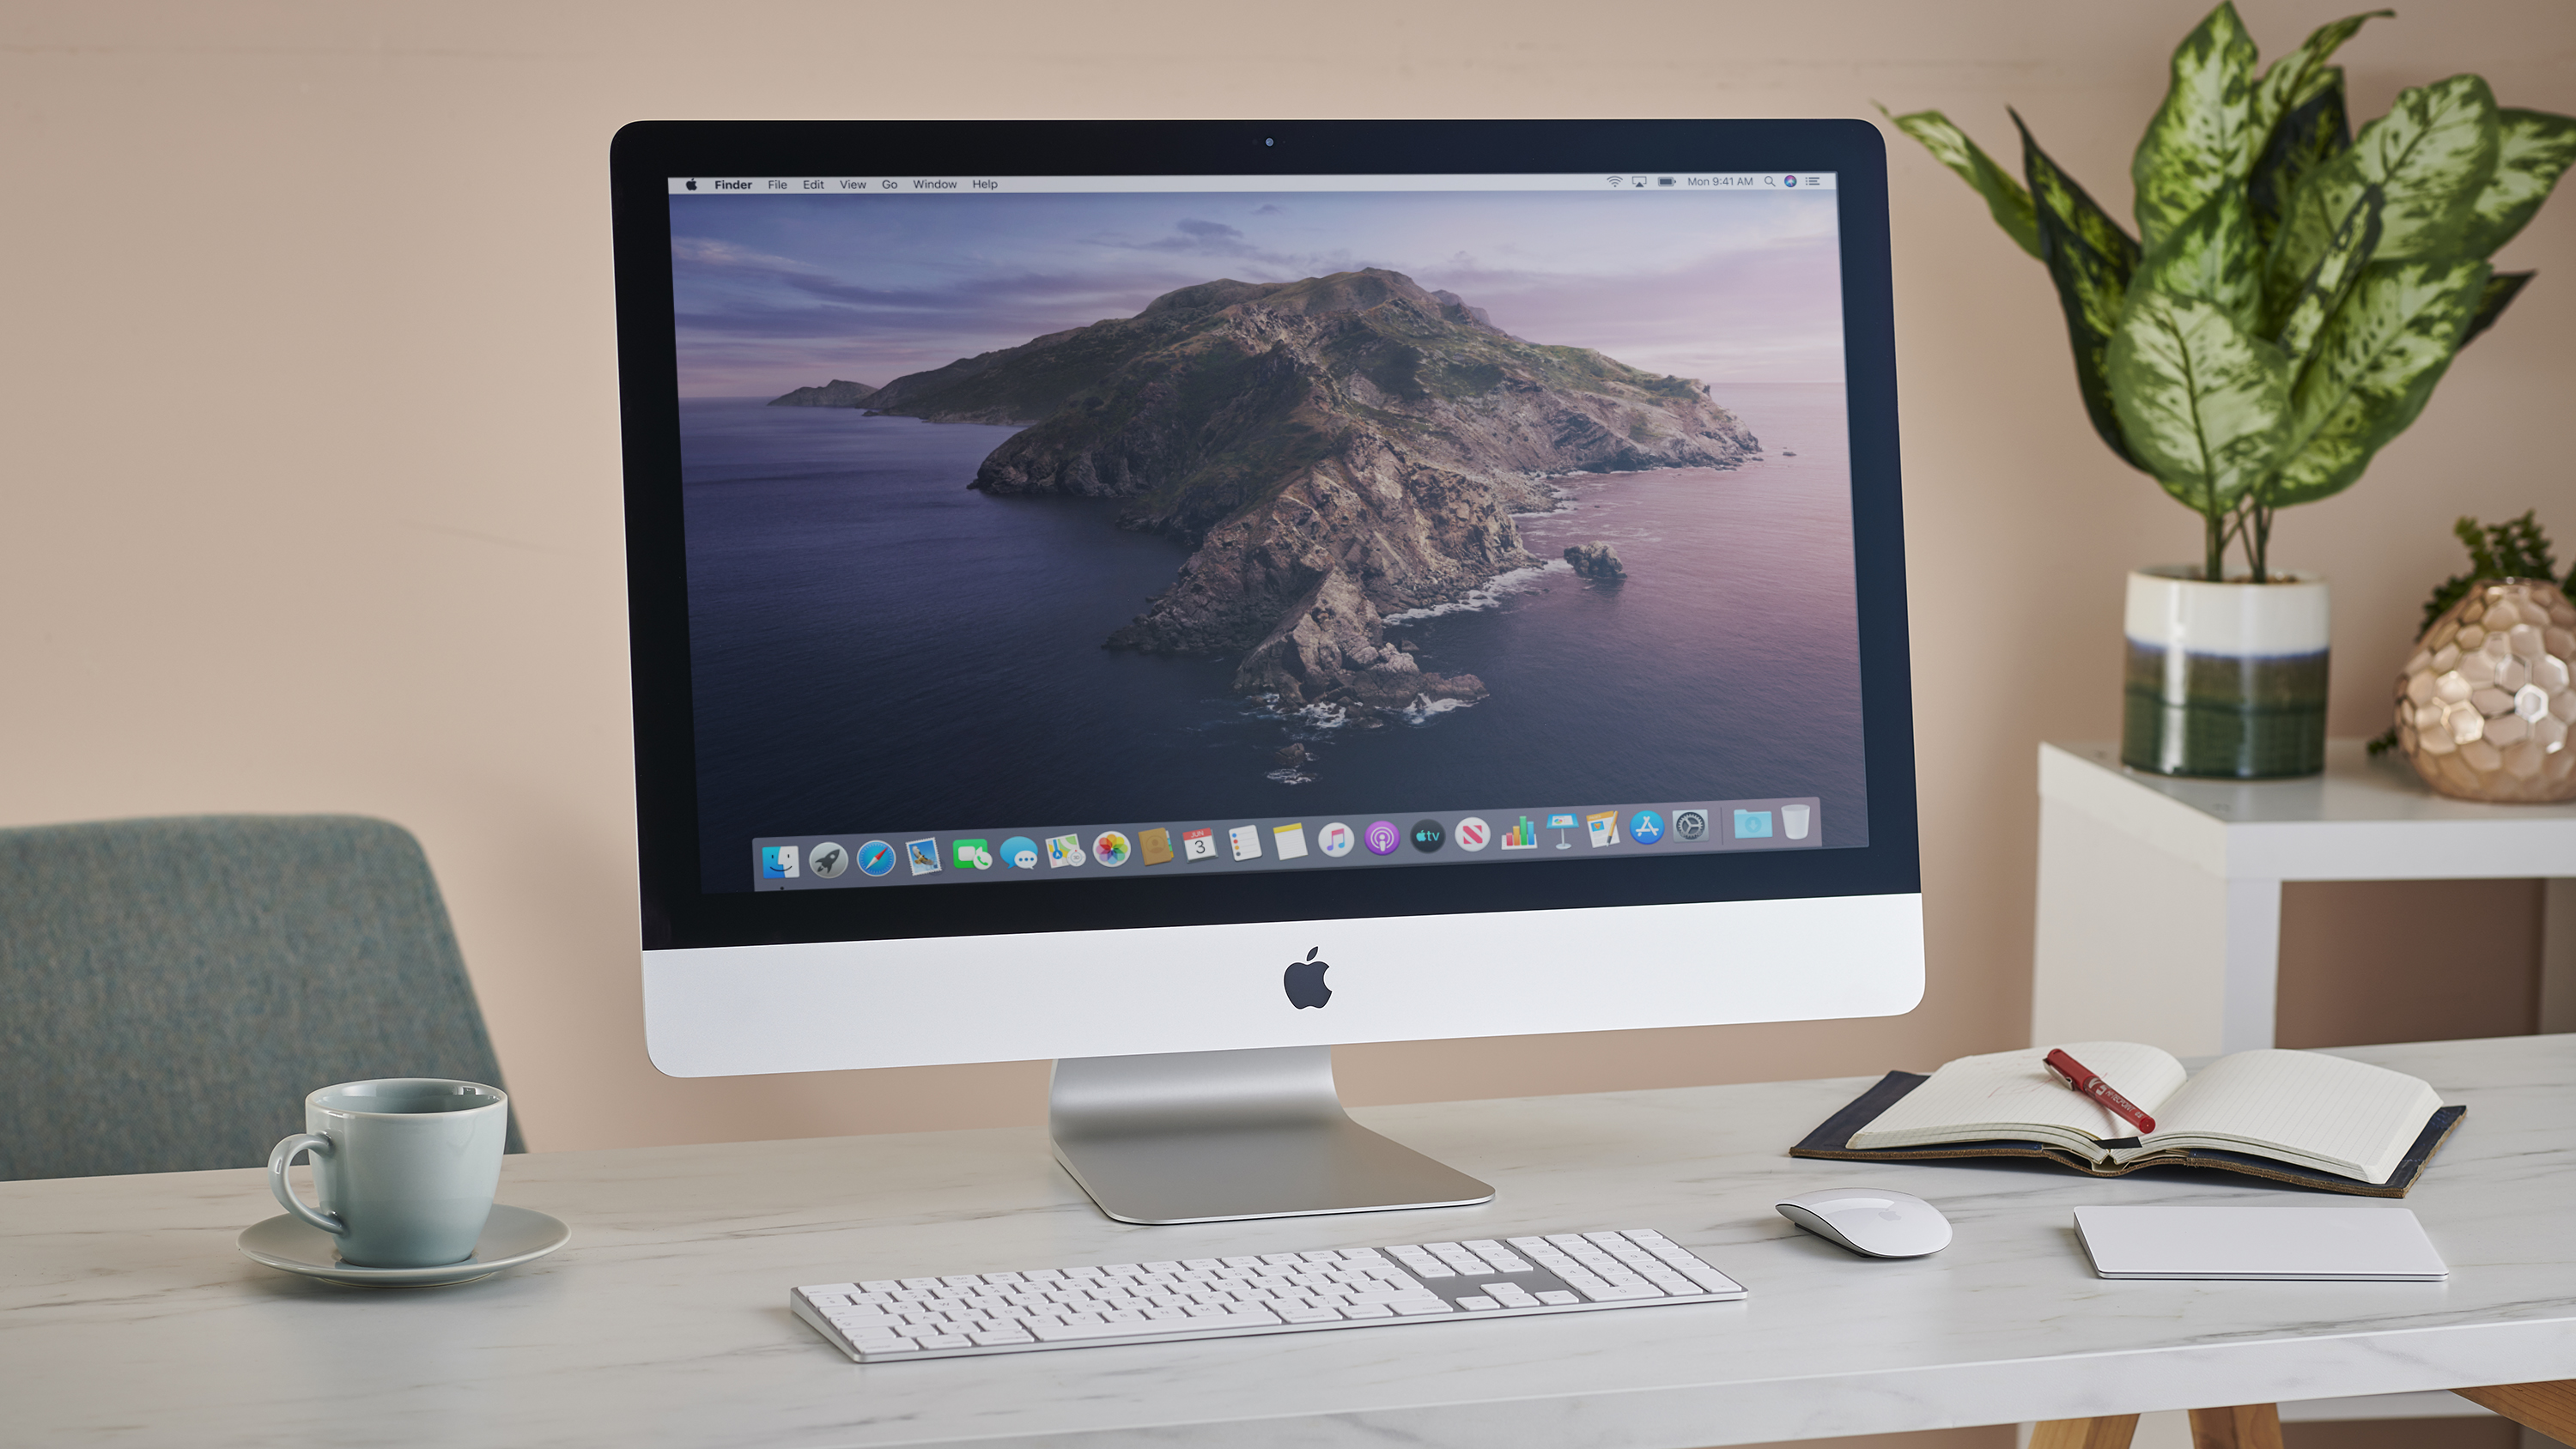 iMac 27-inch 2020 on home office desk, alongside notebook, coffee cup and houseplant